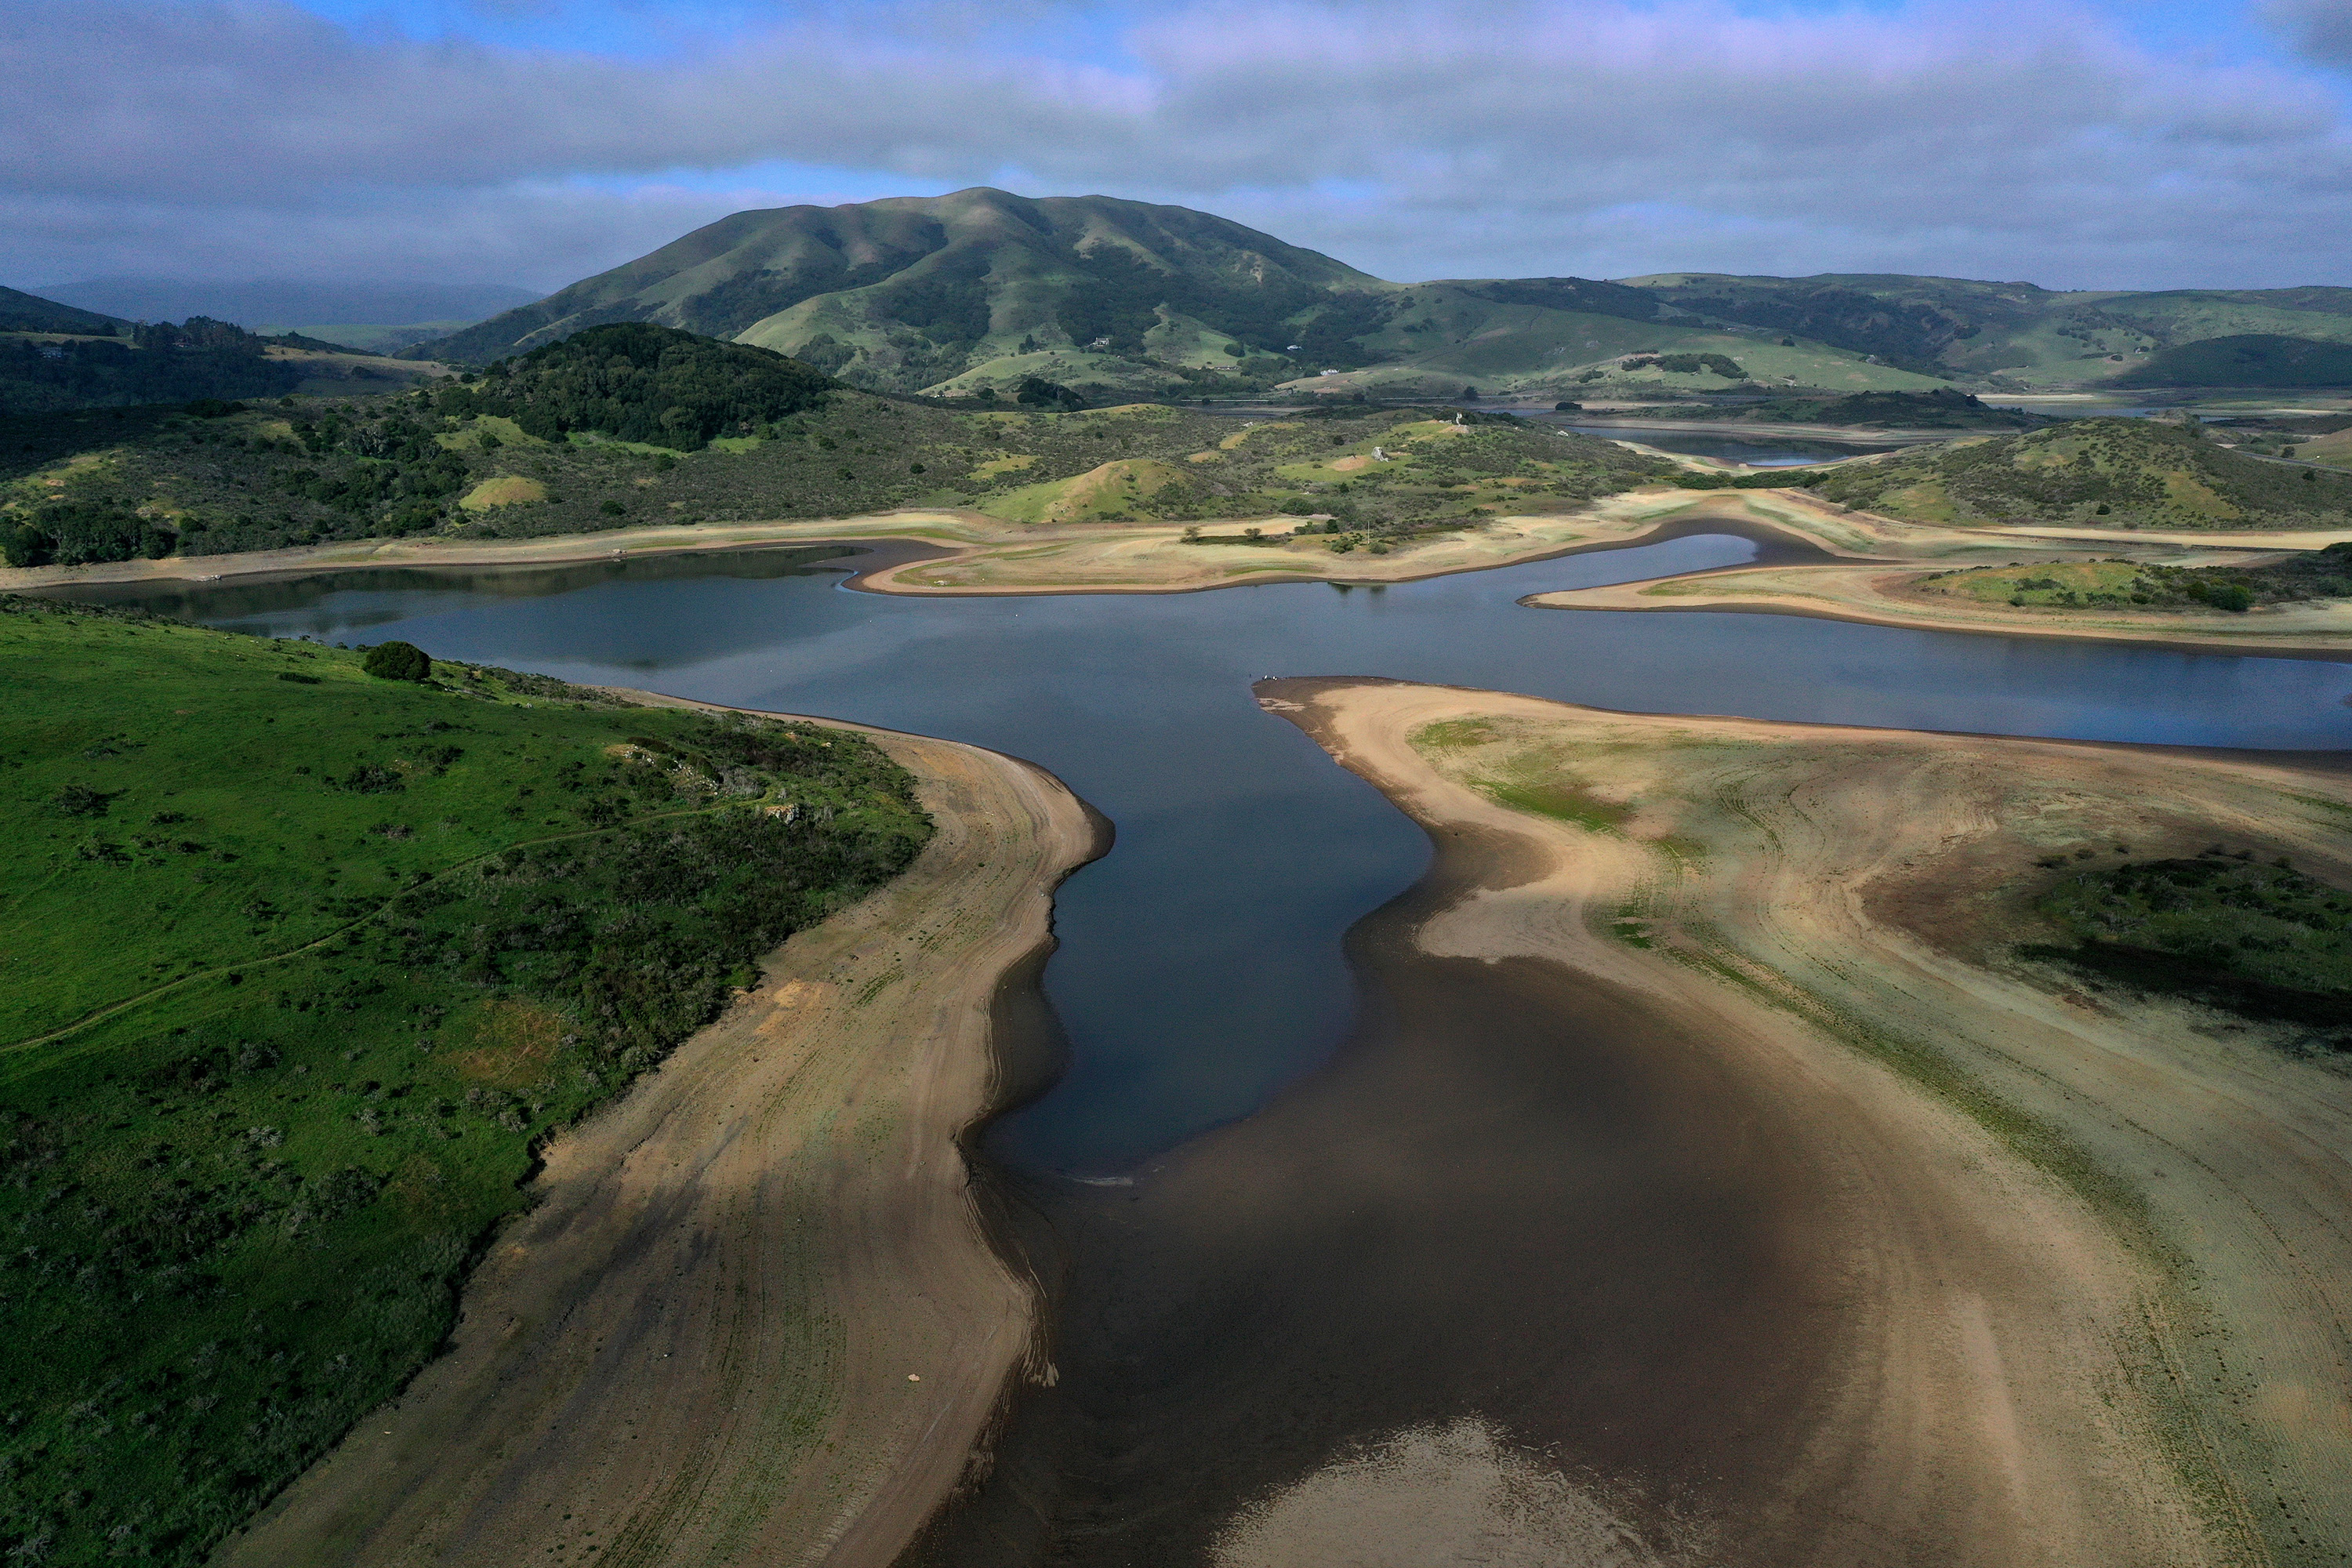 low water levels are visible at Nicasio Reservoir